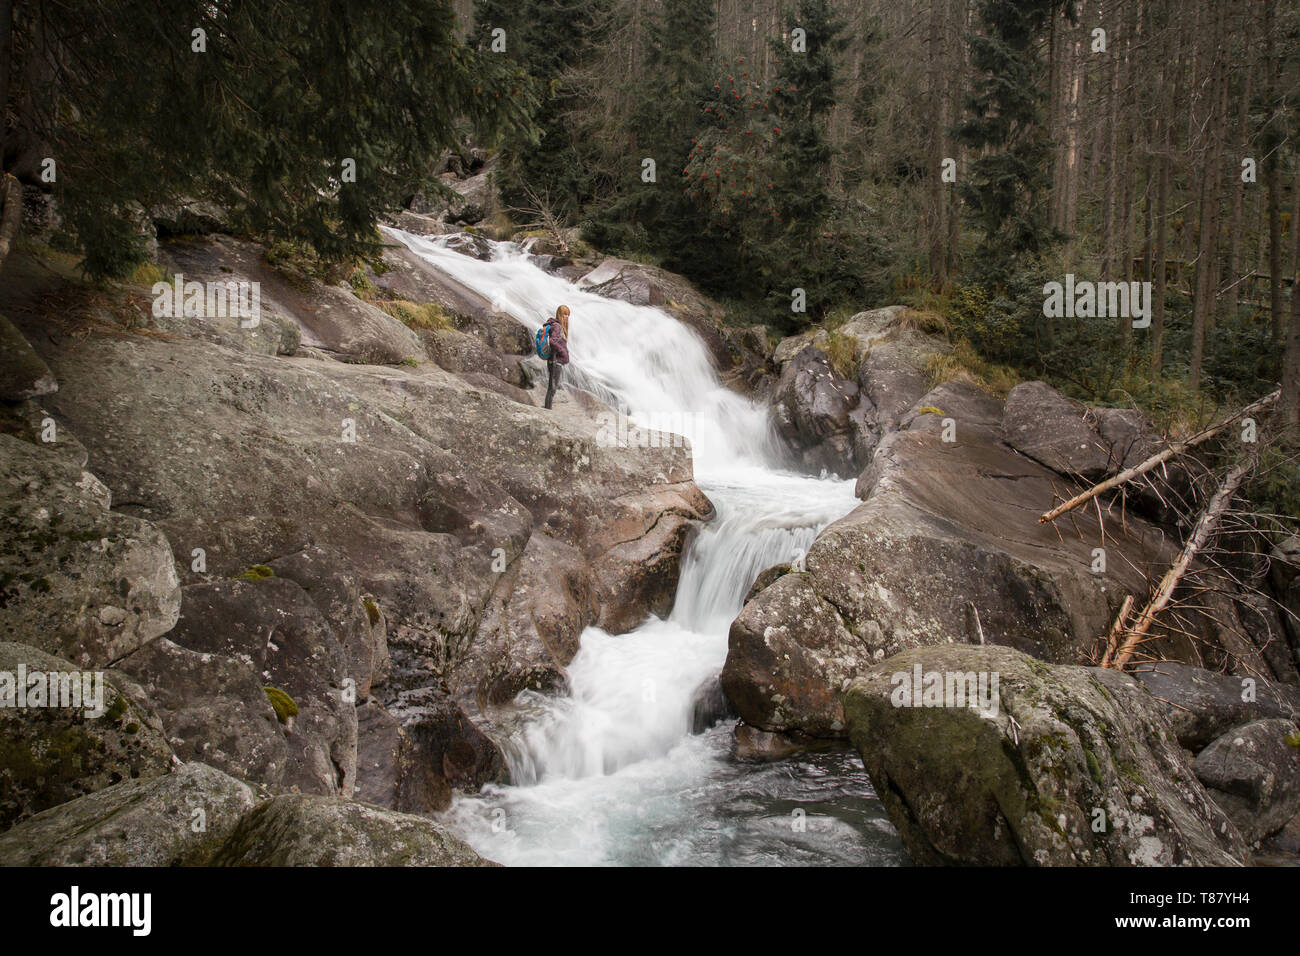 woman standing near strong river in forest Stock Photo